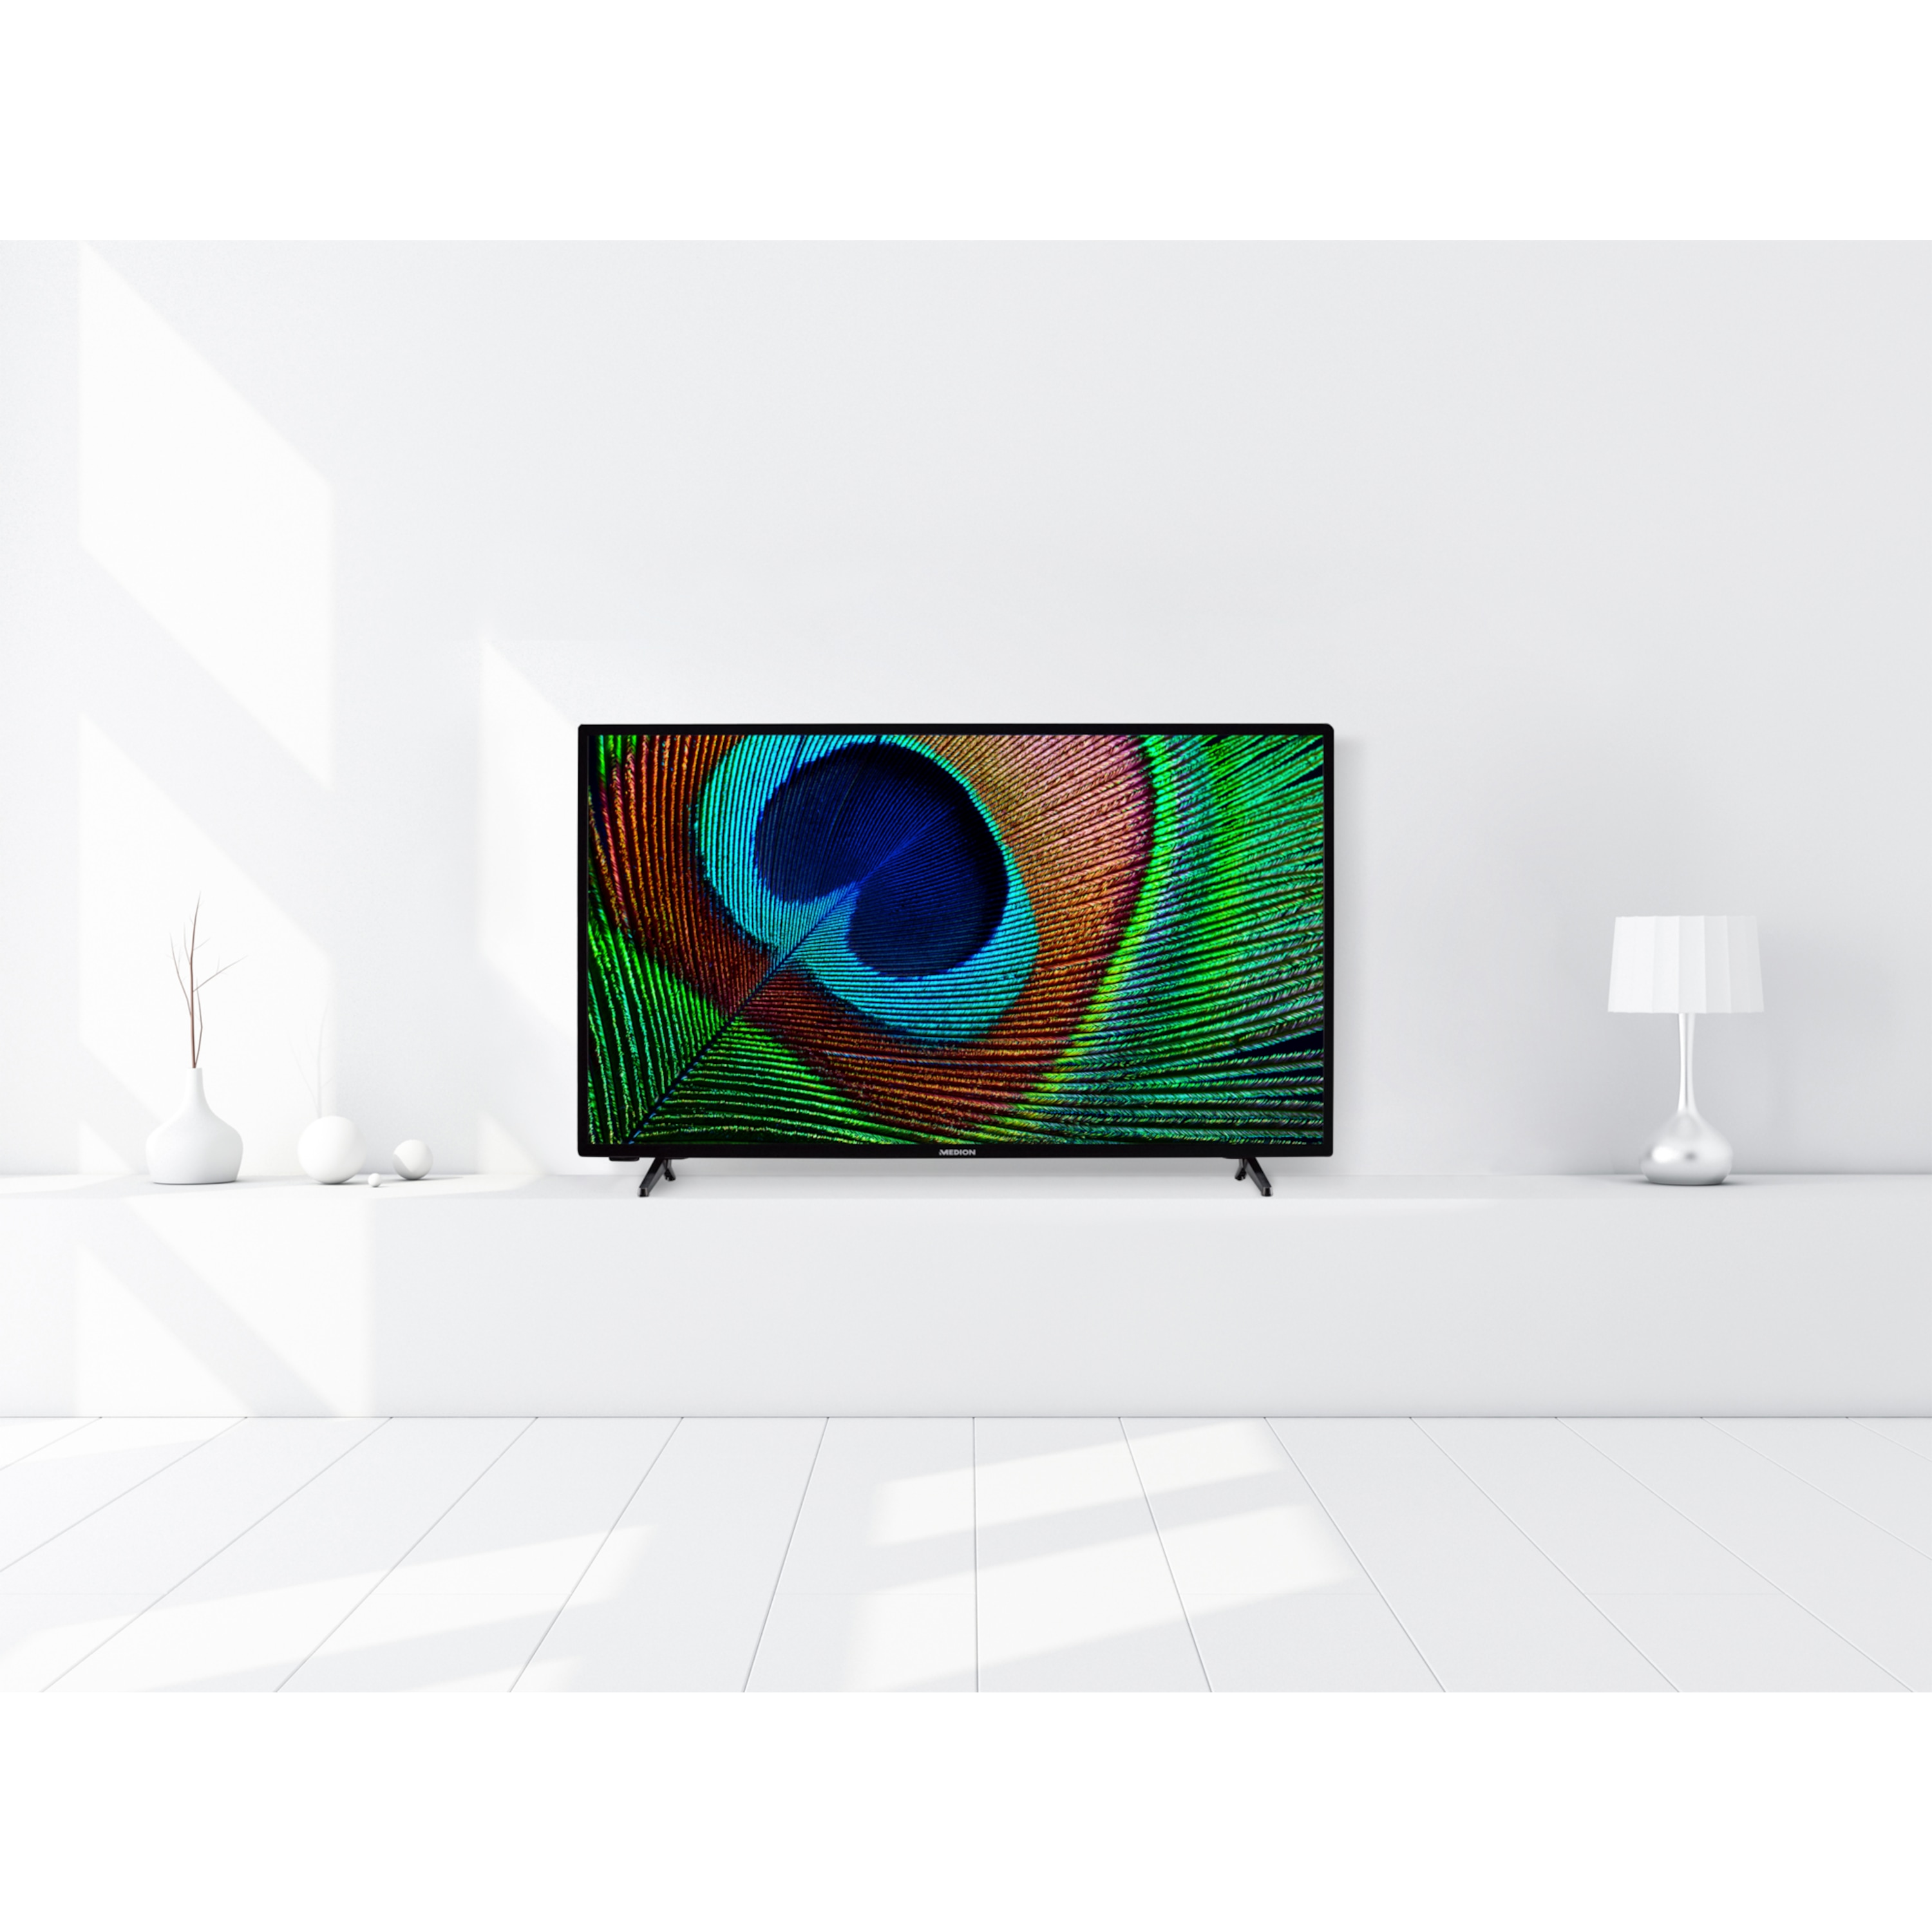 Android) 39,5 HD, Full Netflix Smart 40 Android MEDION TV (Flat, HD HDR Fernseher cm, mit / Fernseher Zoll 100,3 100,3 cm, Zoll, P14093 TV